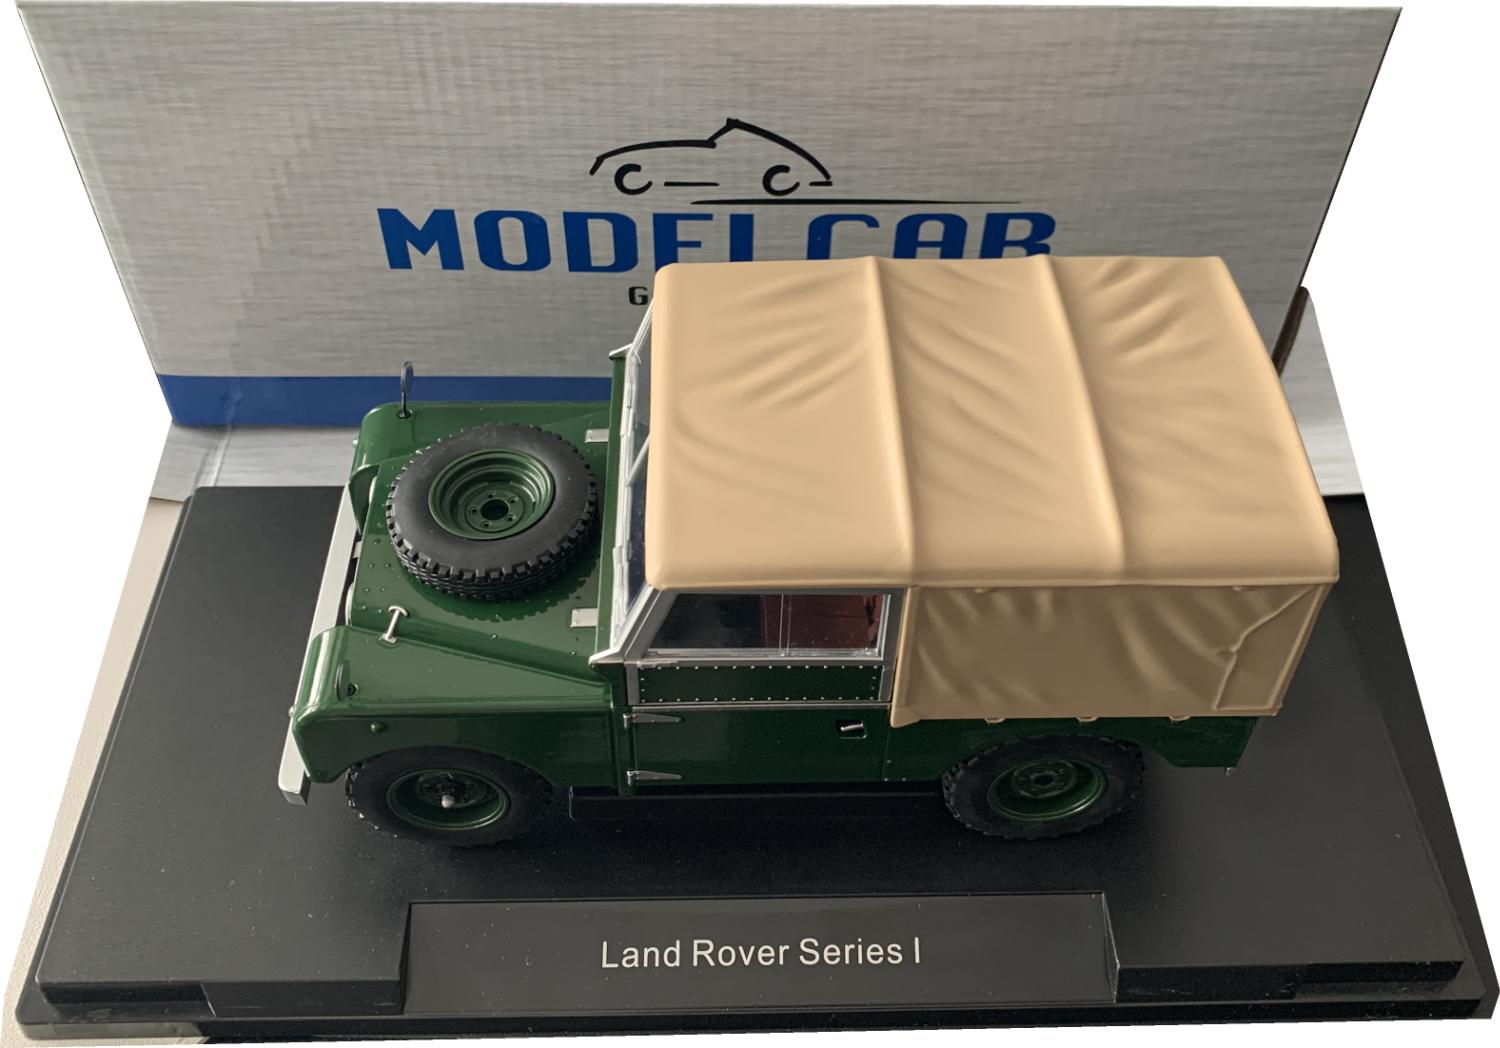 An excellent scale model of the Land Rover Series 1 Closed with high level of detail throughout, all authentically recreated.  Model is presented on a removable plinth in a window display box.  The car is approx. 20 cm long and the presentation box is 31 cm long